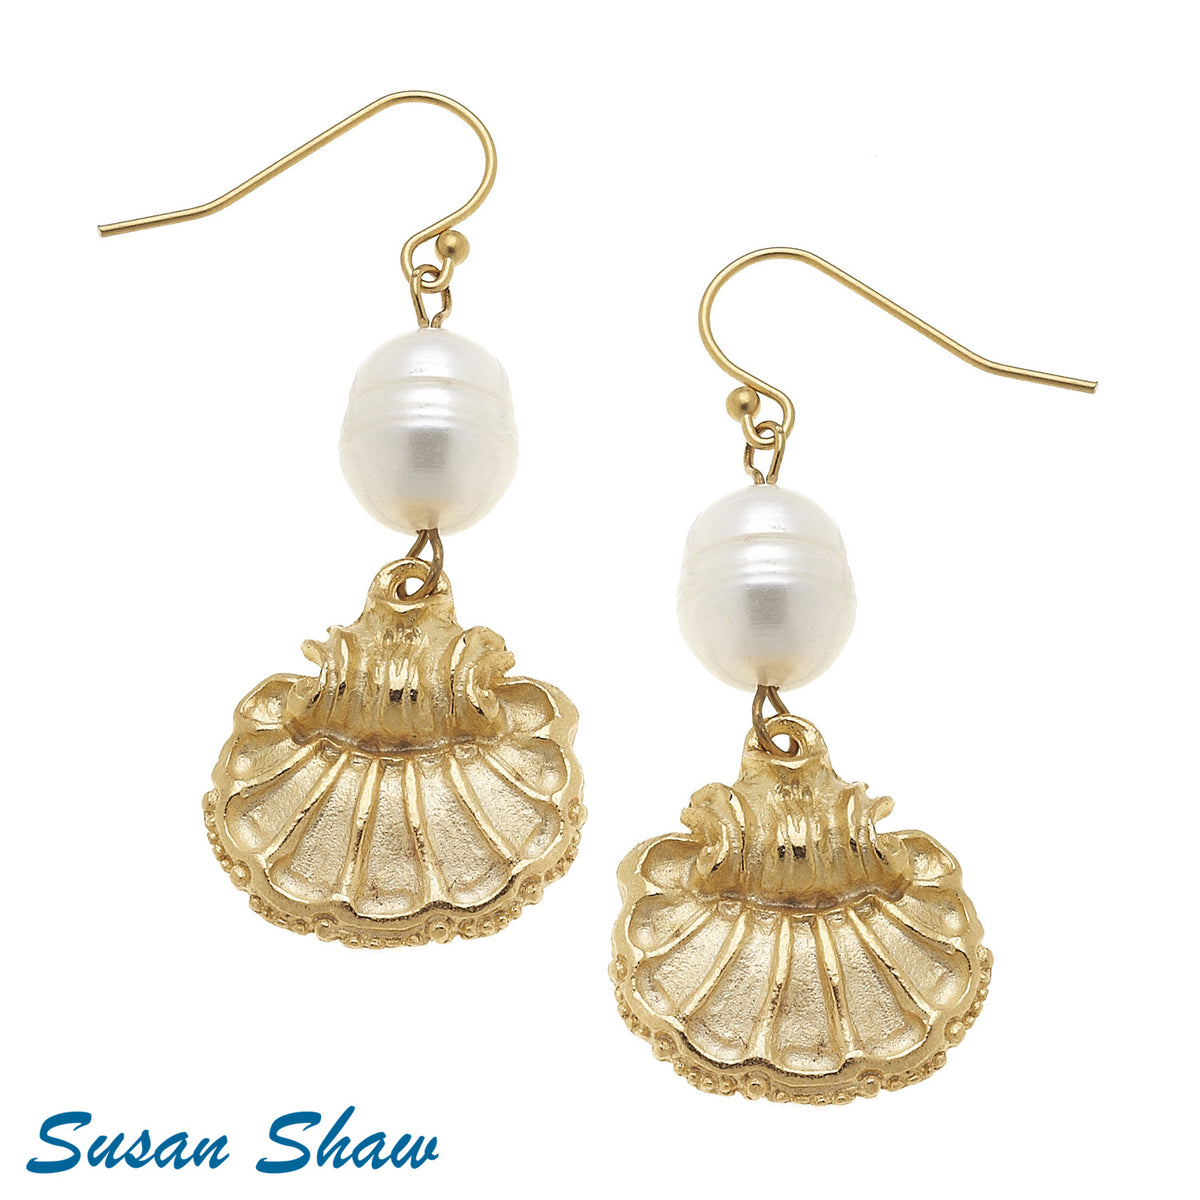 Handcast Gold scallop Shell & Genuine Freshwater Pearl Earrings